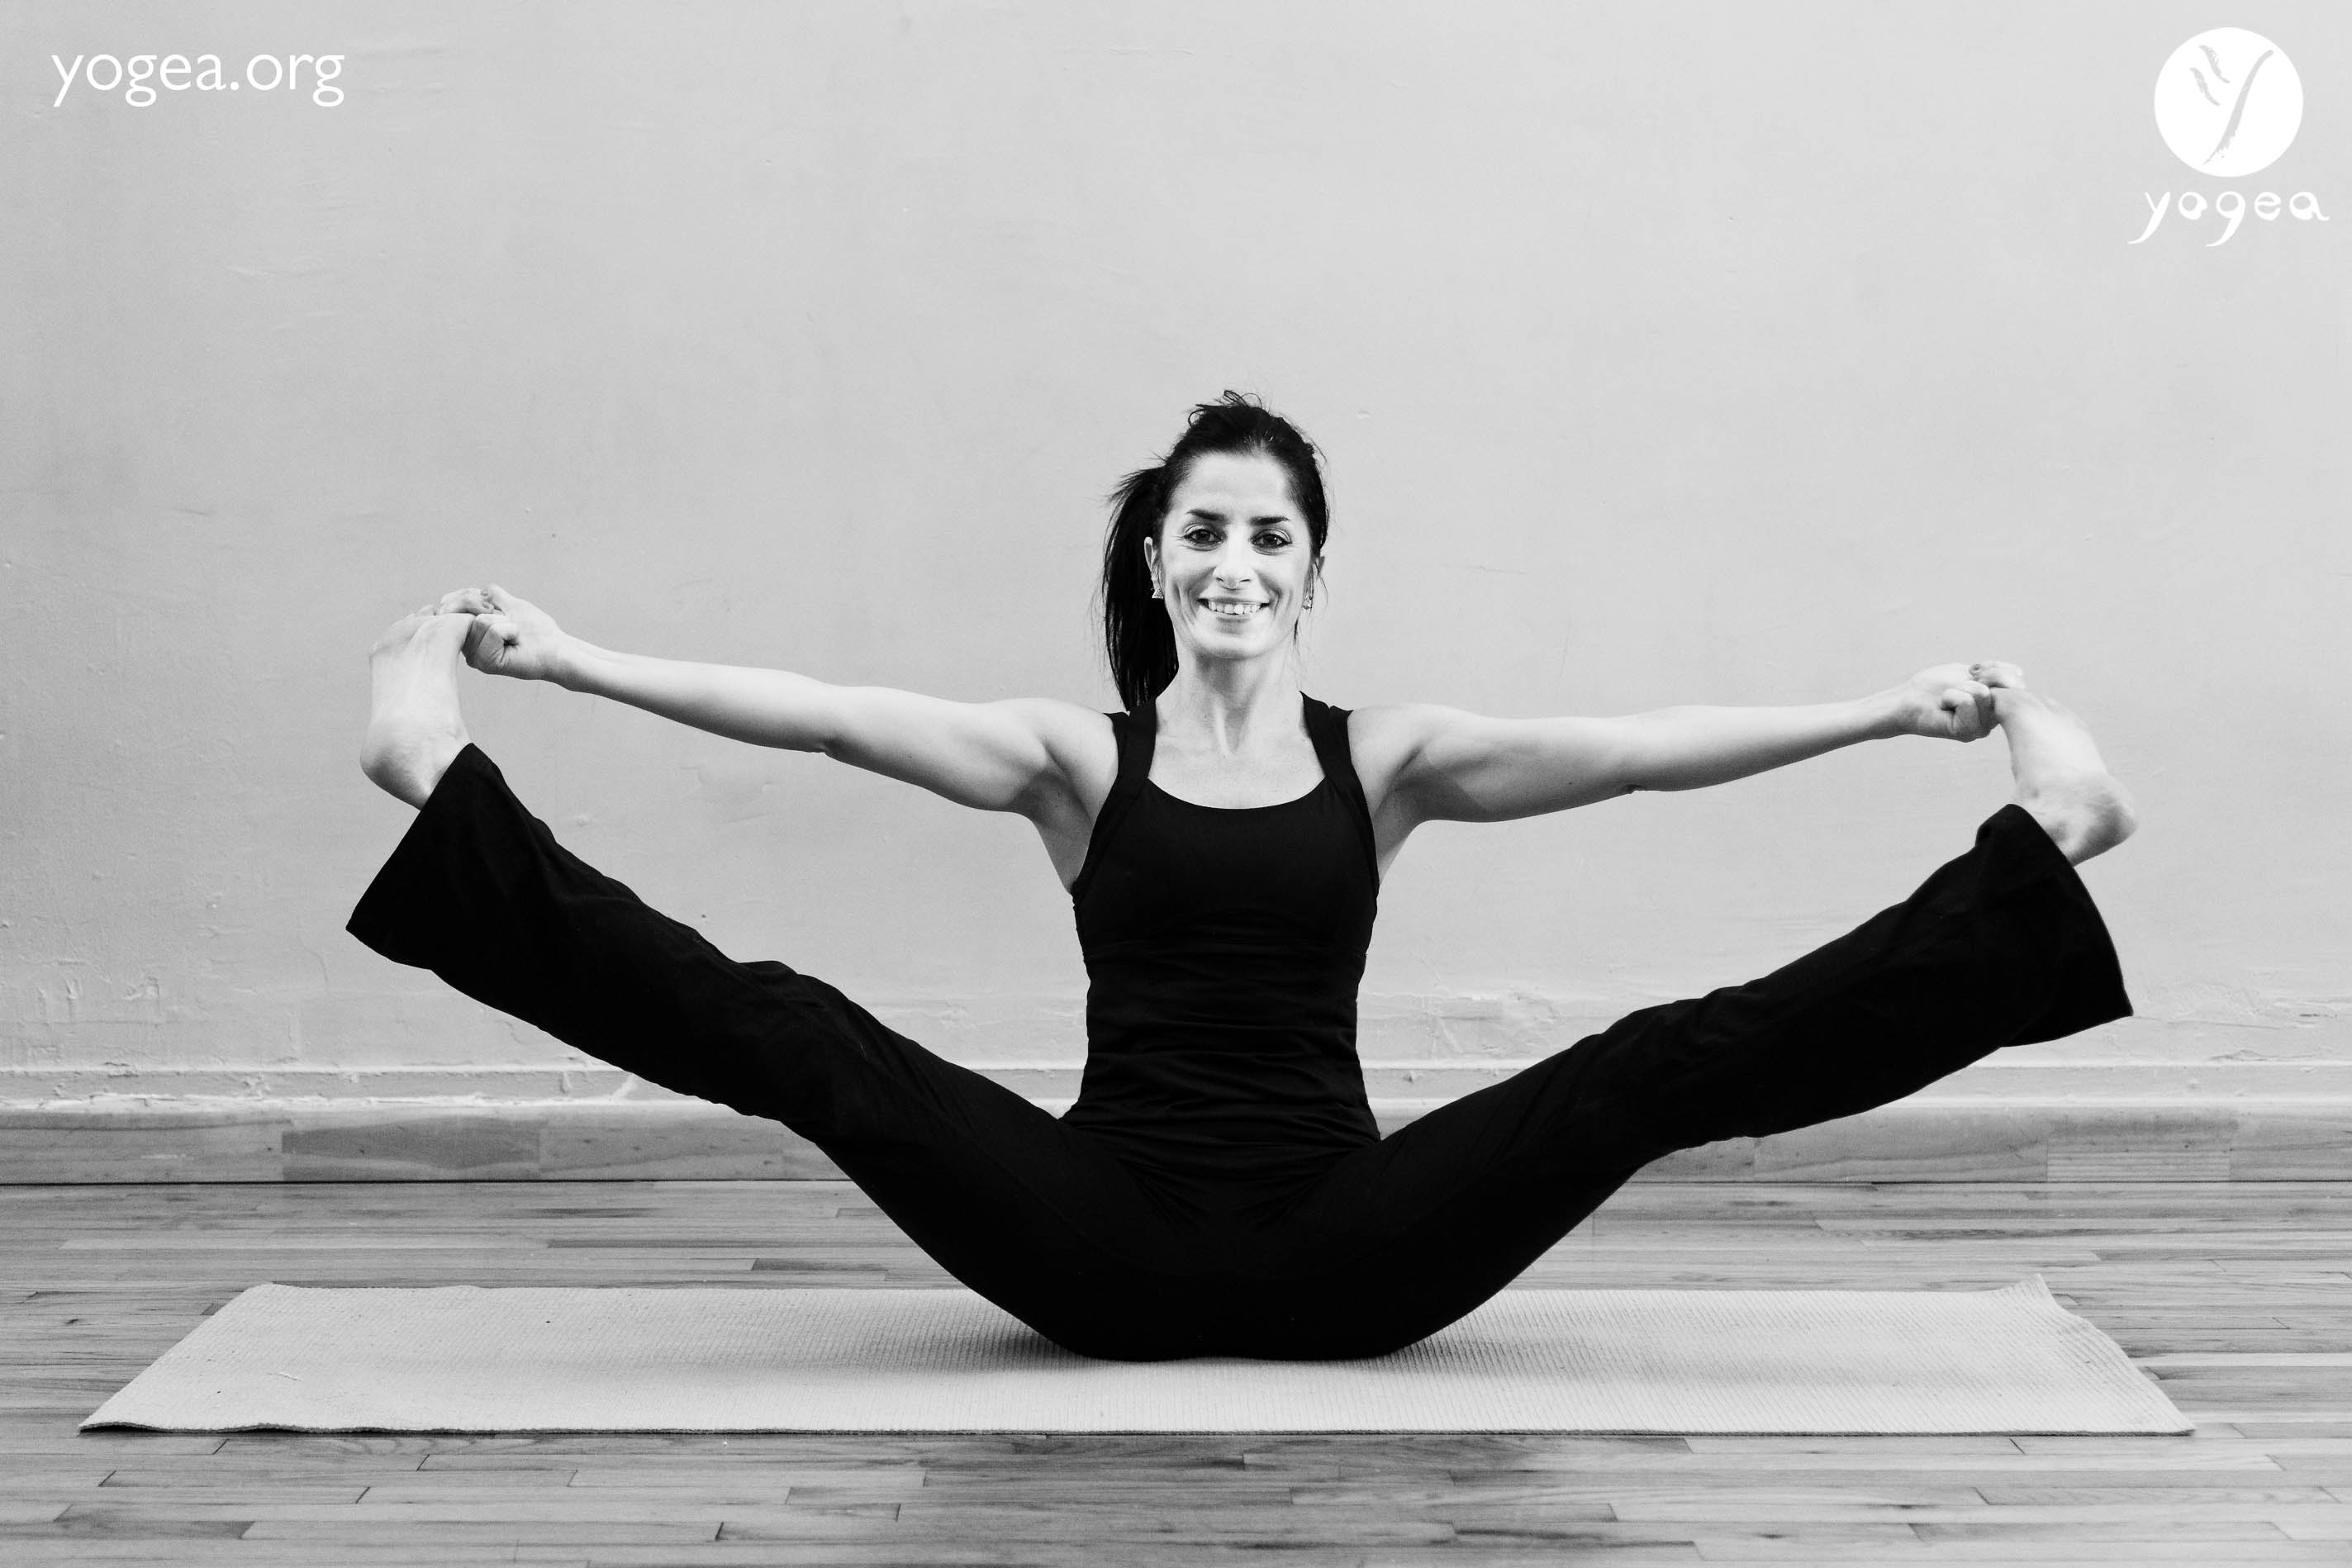 Yoga Guide for Beginners 101 Poses and Sequences for Strength, Flexibility  and Mindfulness (Melody White) (z-lib org) epub - Yoga